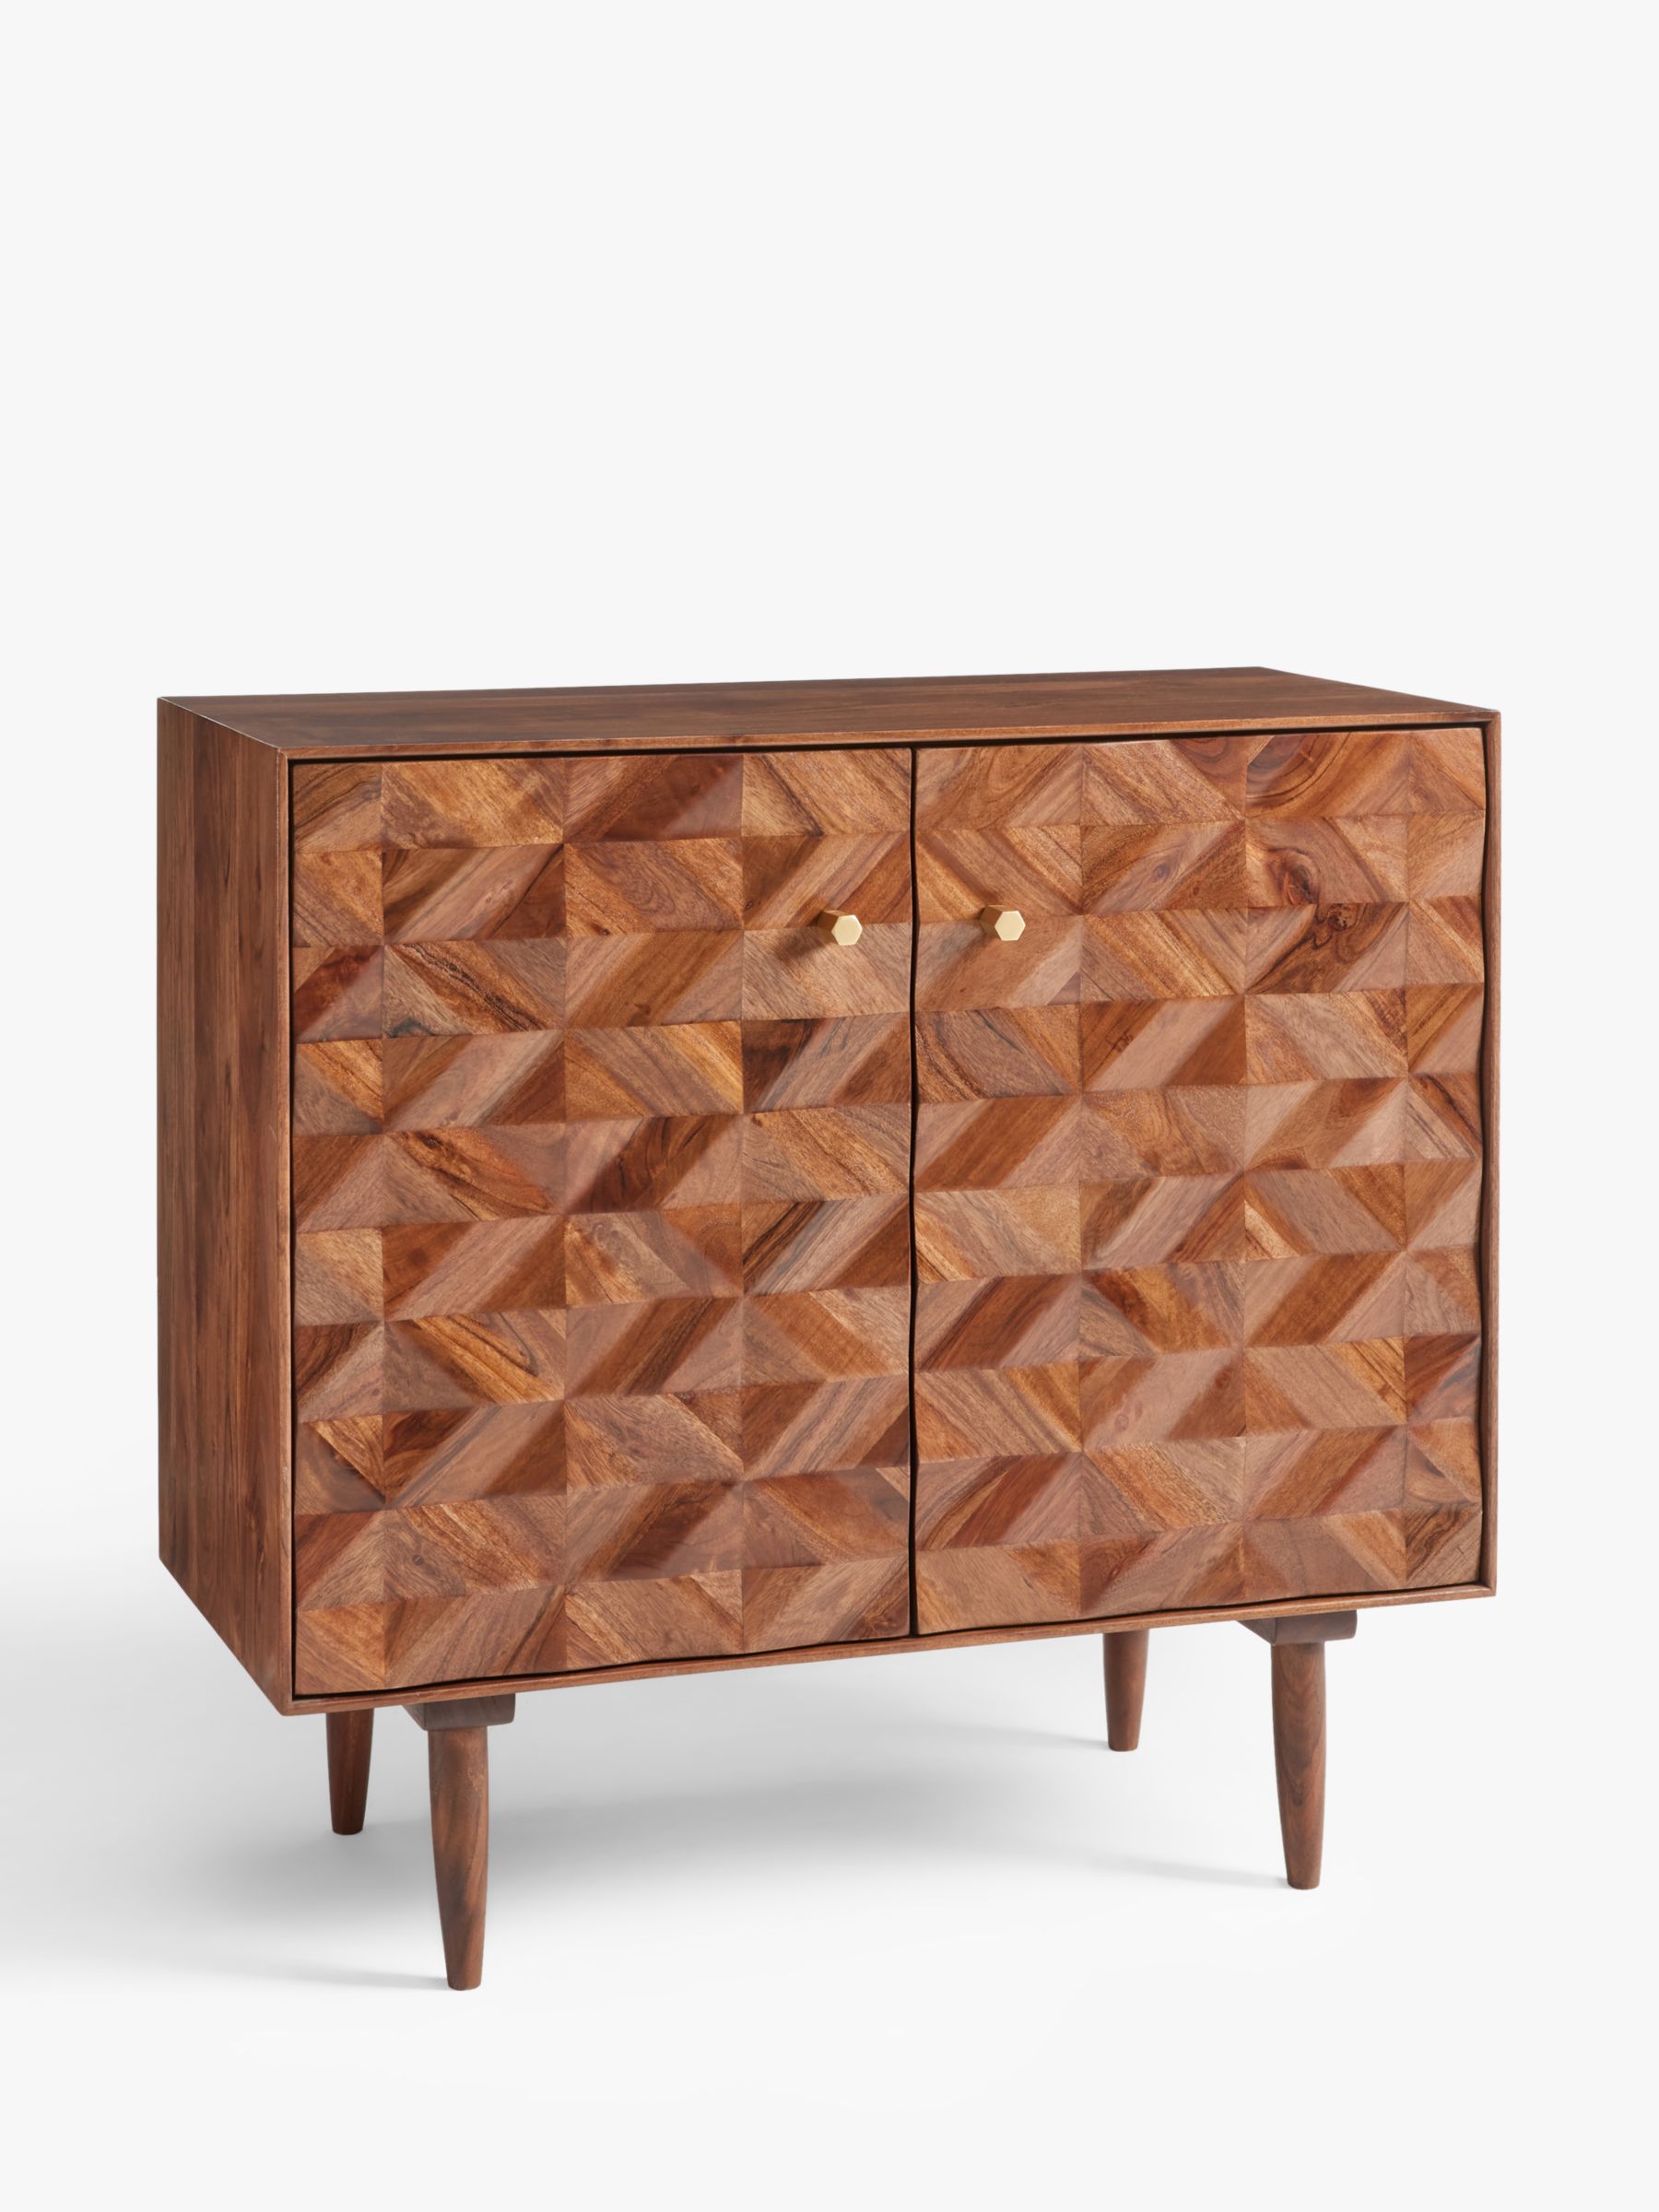 Photo of John lewis + swoon franklin acacia wood storage cabinet natural